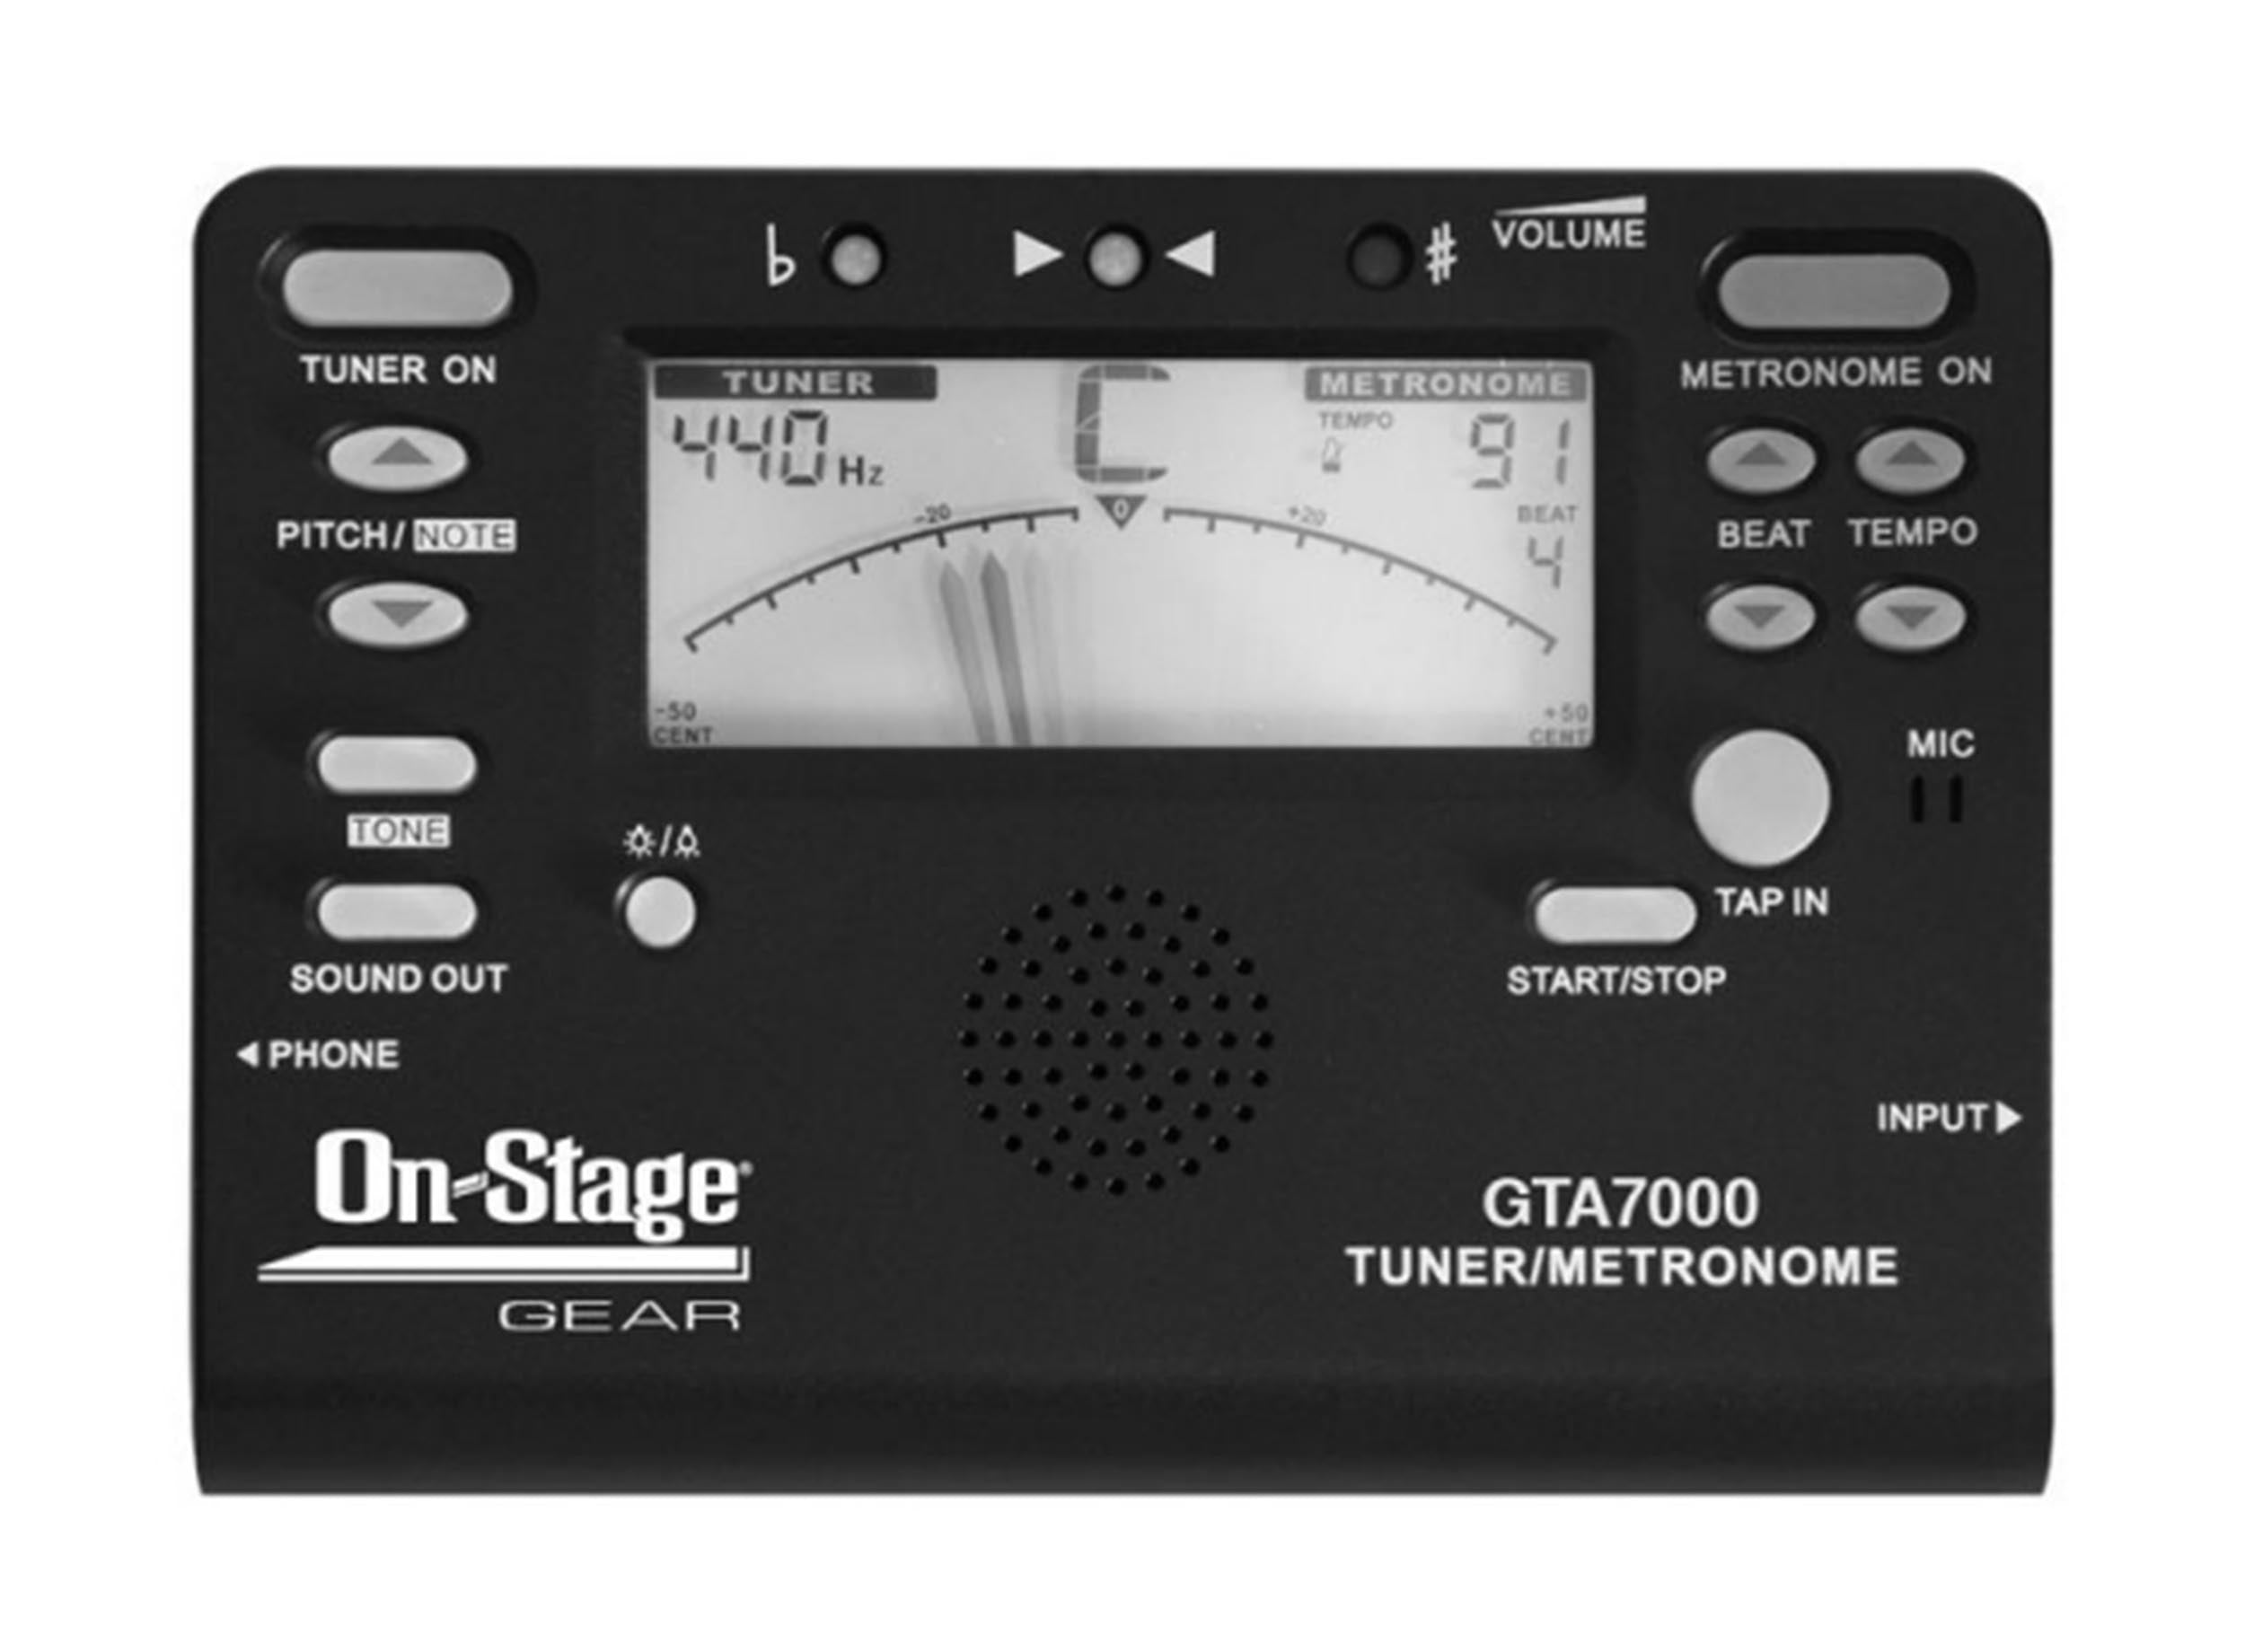 On Stage GTA7000, Chromatic Tuner, Metronome and Tone Generator On-Stage